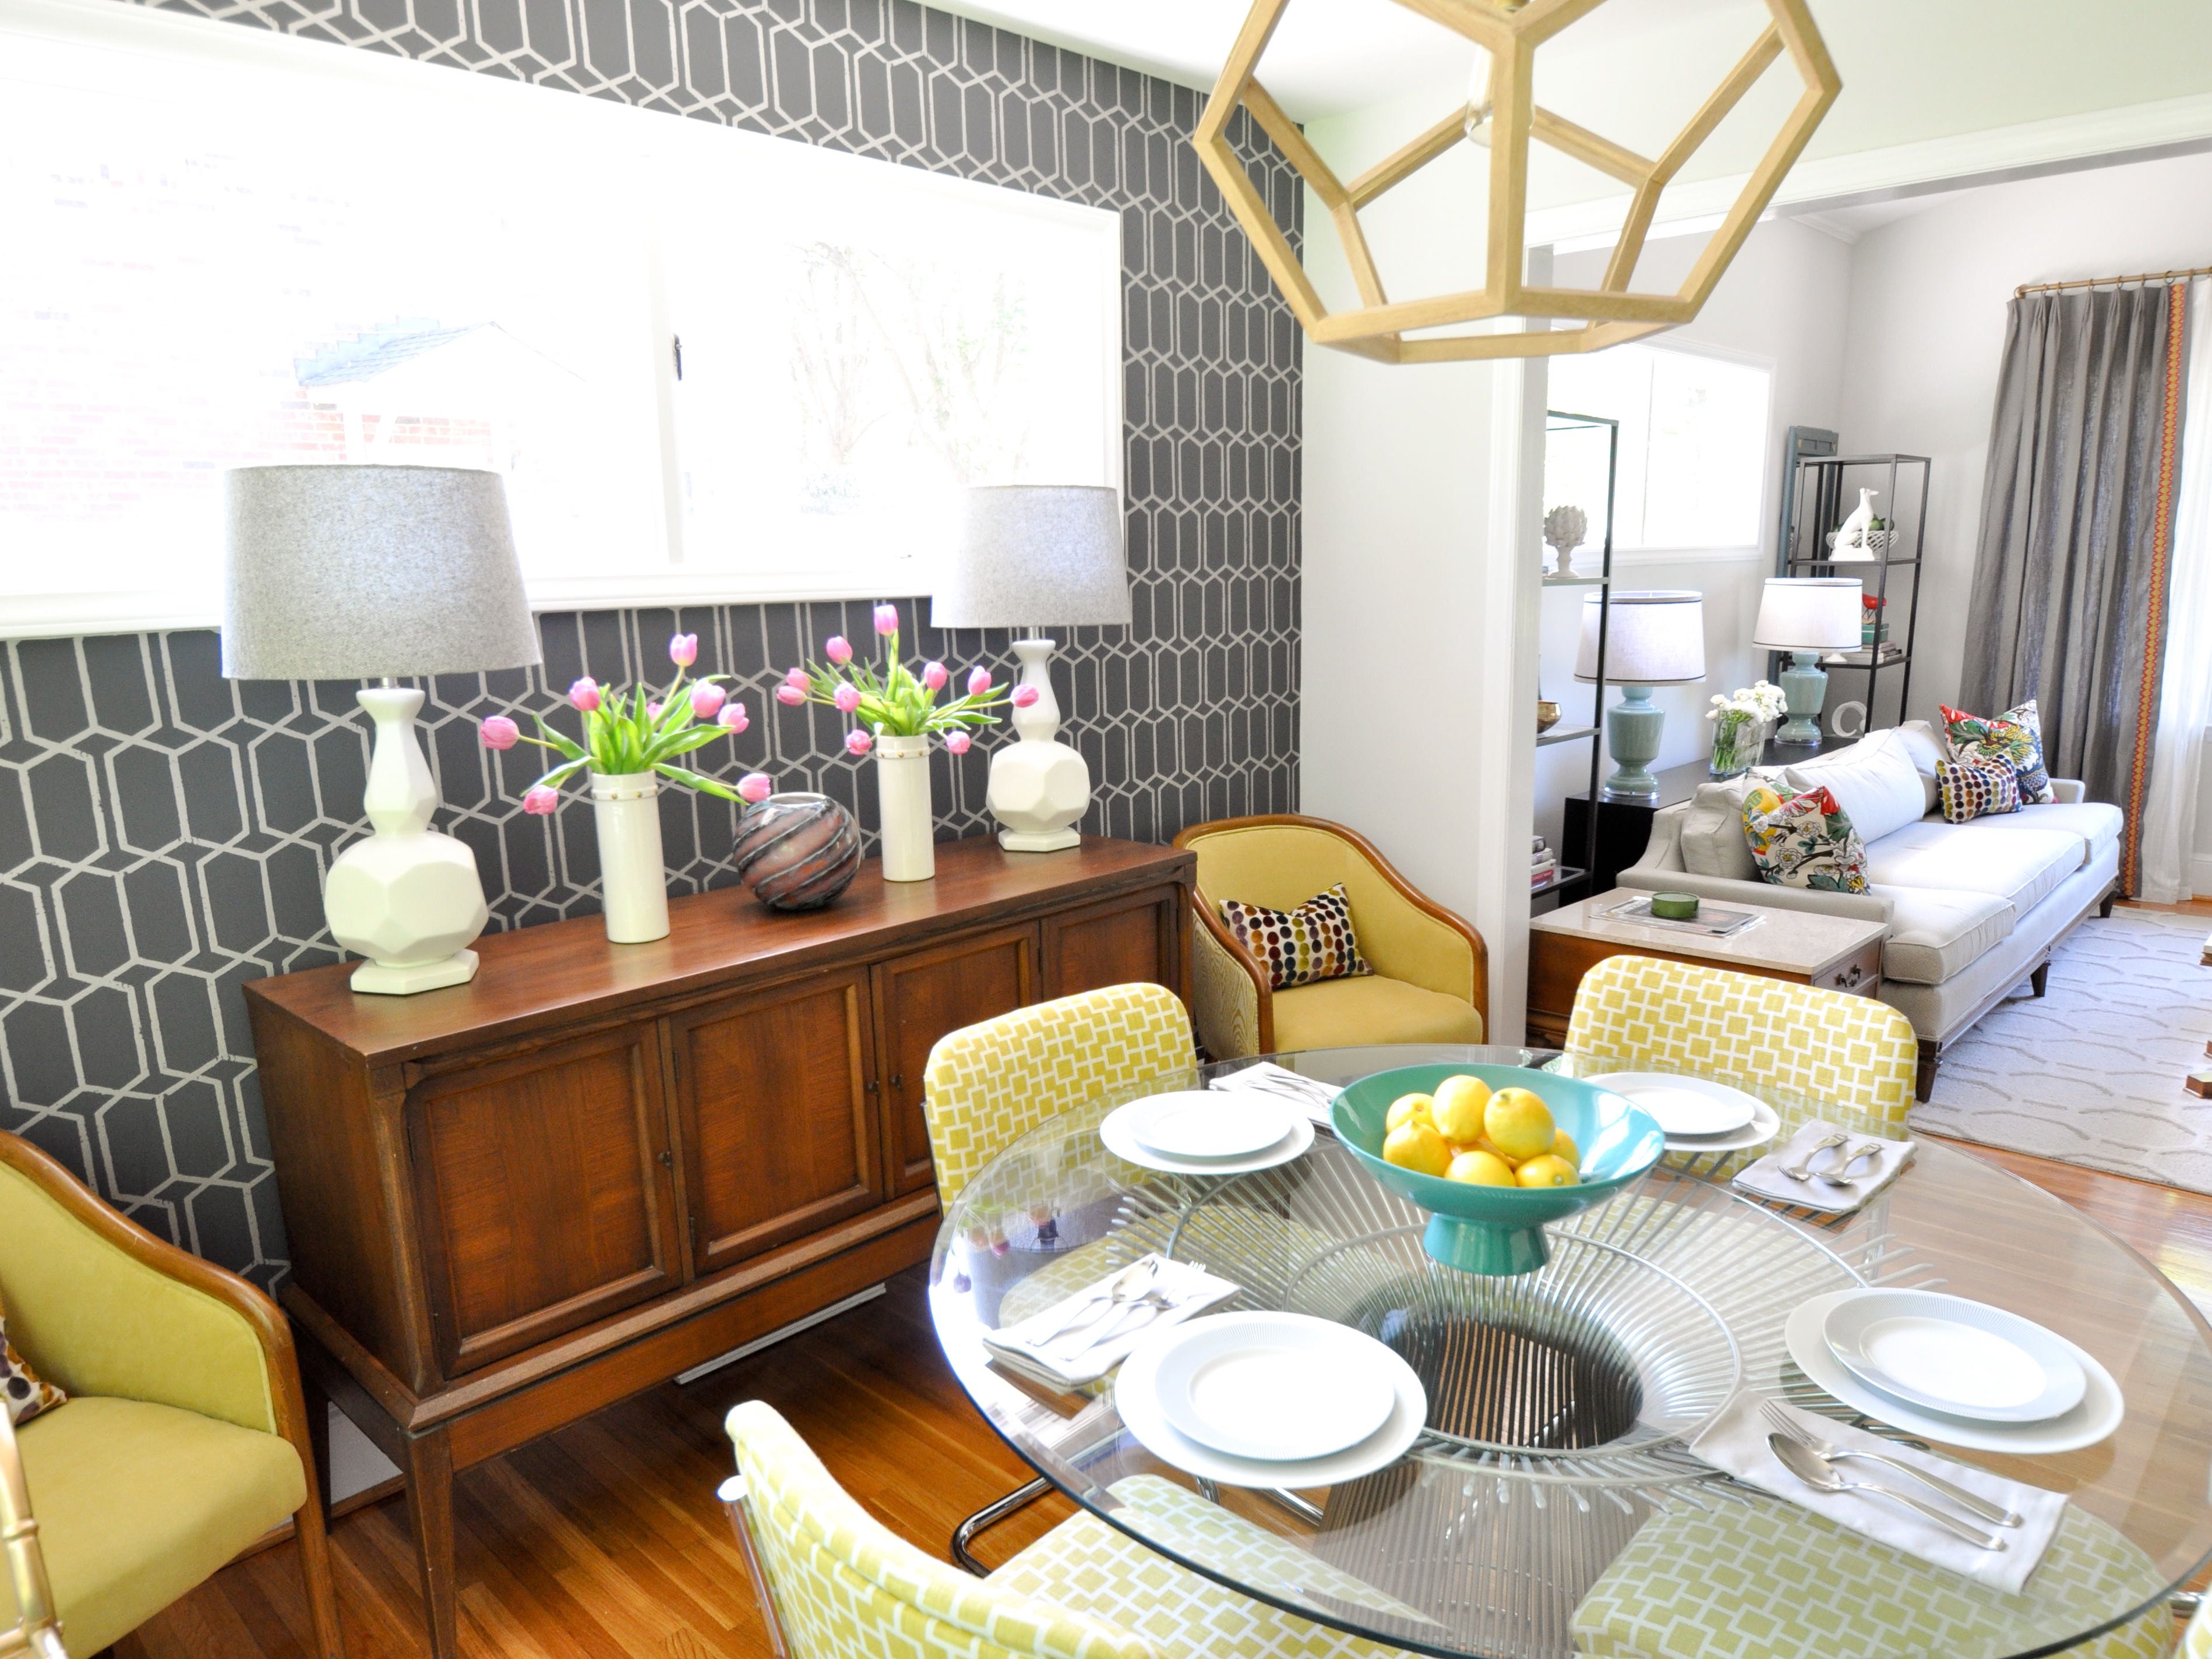 Expert Tips To Choose The Dining Room Chairs And Table #17057 | Dining